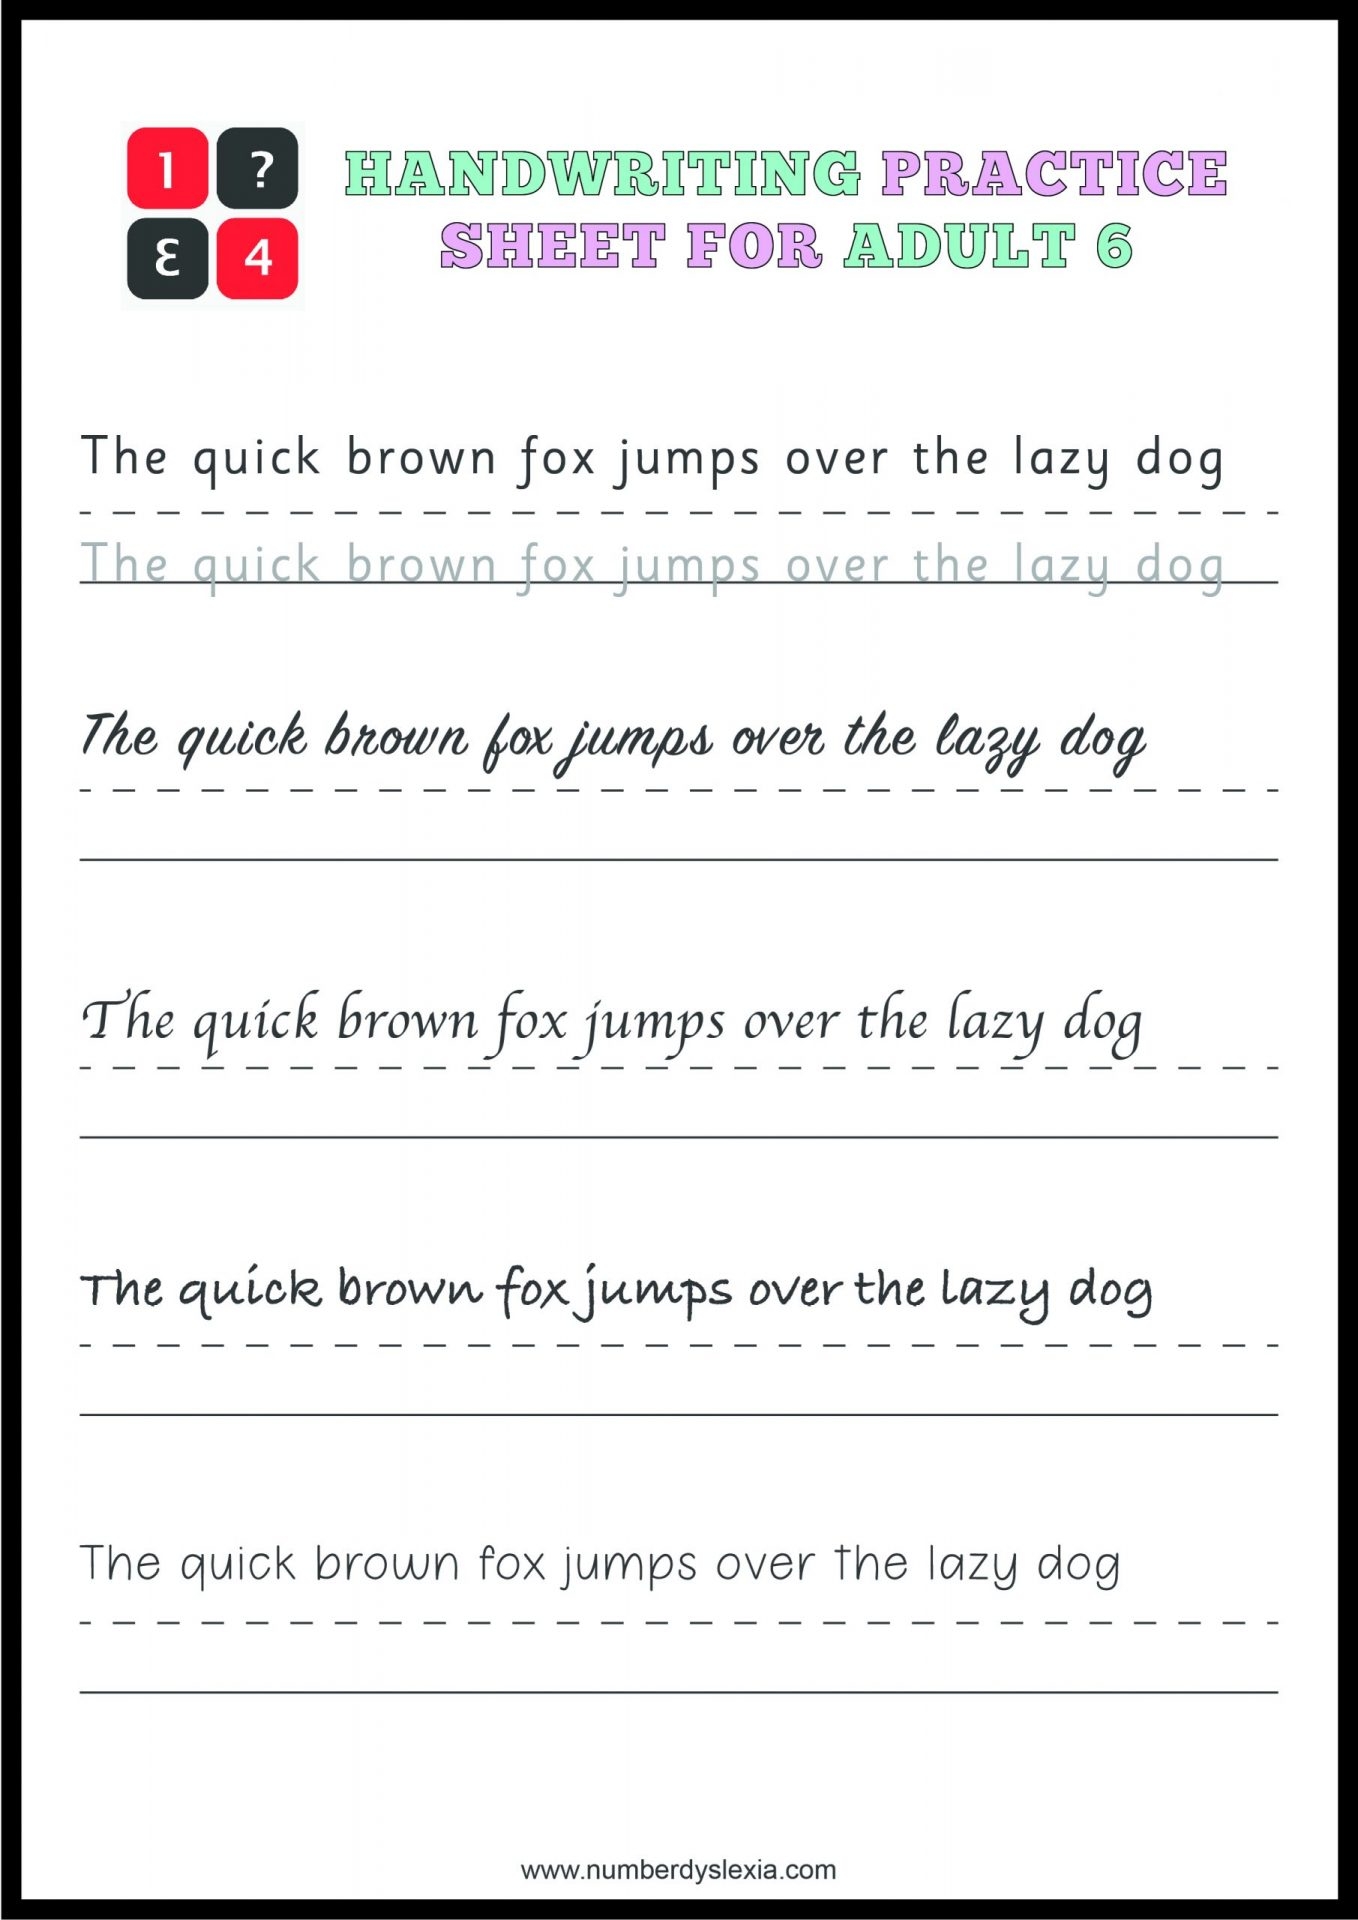 Free Printable Handwriting Practice Worksheets For Adults PDF UPDATED 2022 Number Dyslexia